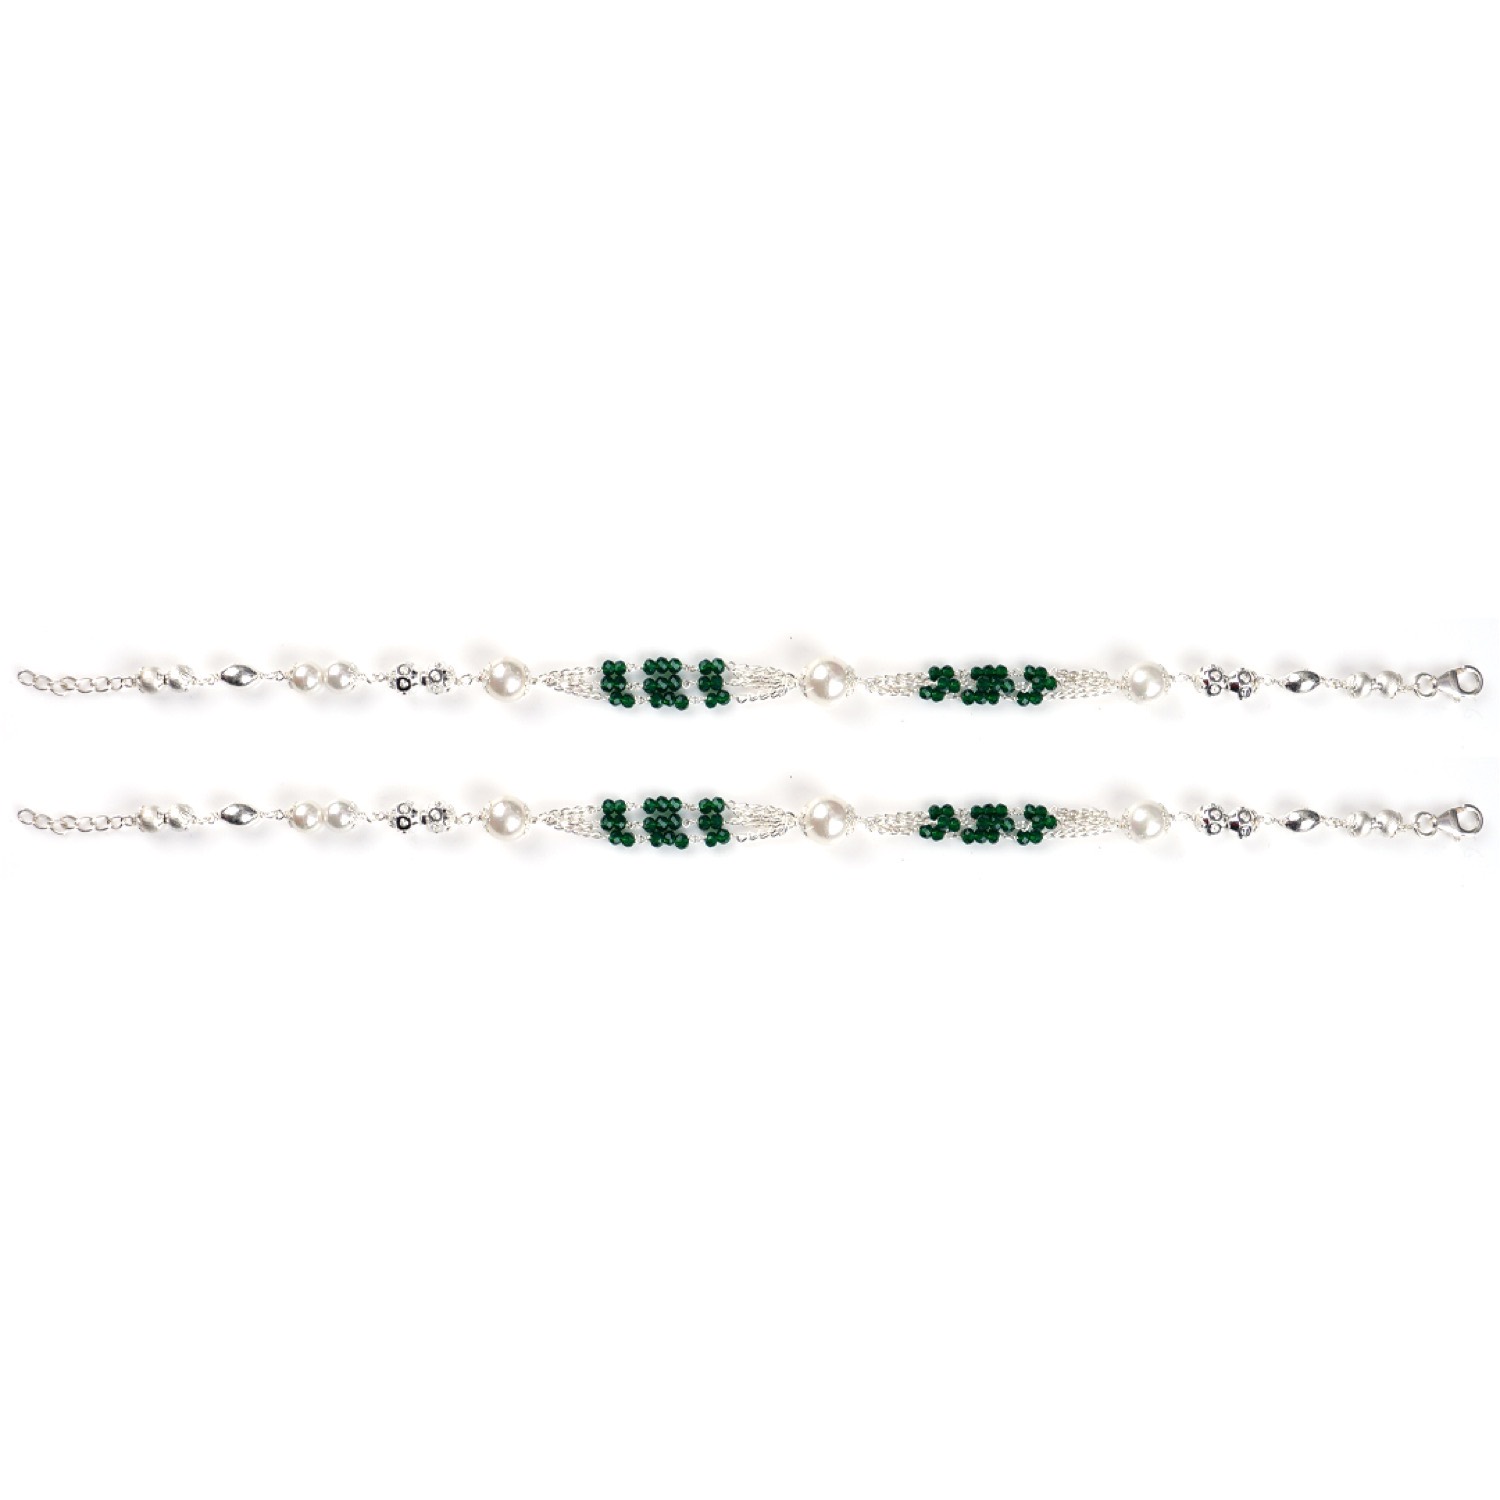 varam_anklets_072022_white_and_green_stone_silver_anklets_099-1